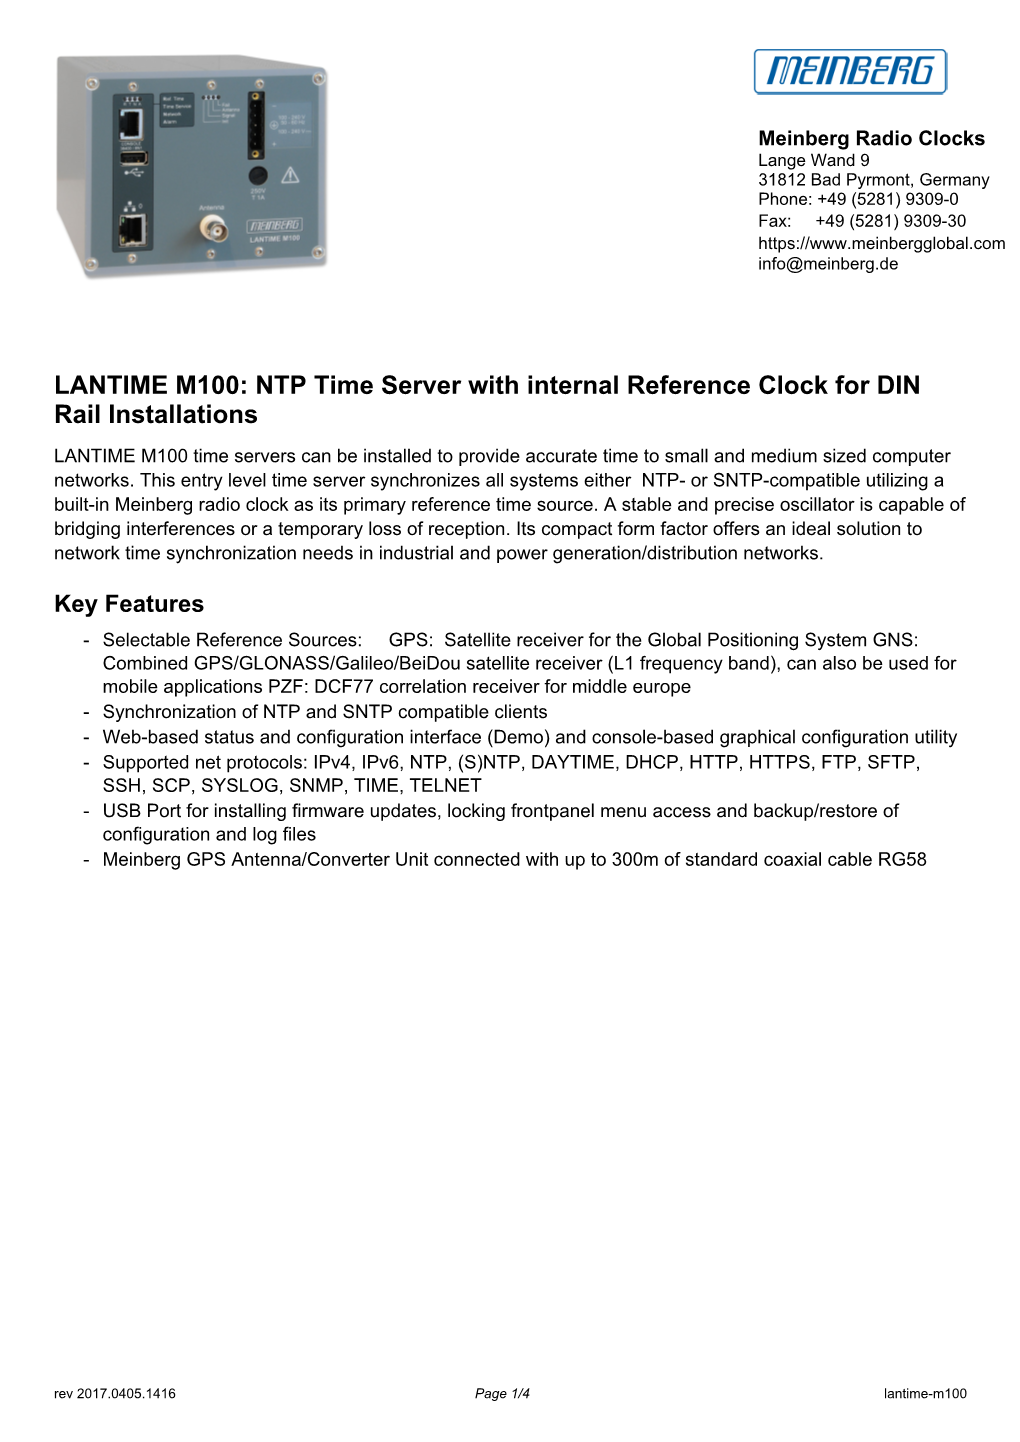 LANTIME M100: NTP Time Server with Internal Reference Clock for DIN Rail Installations